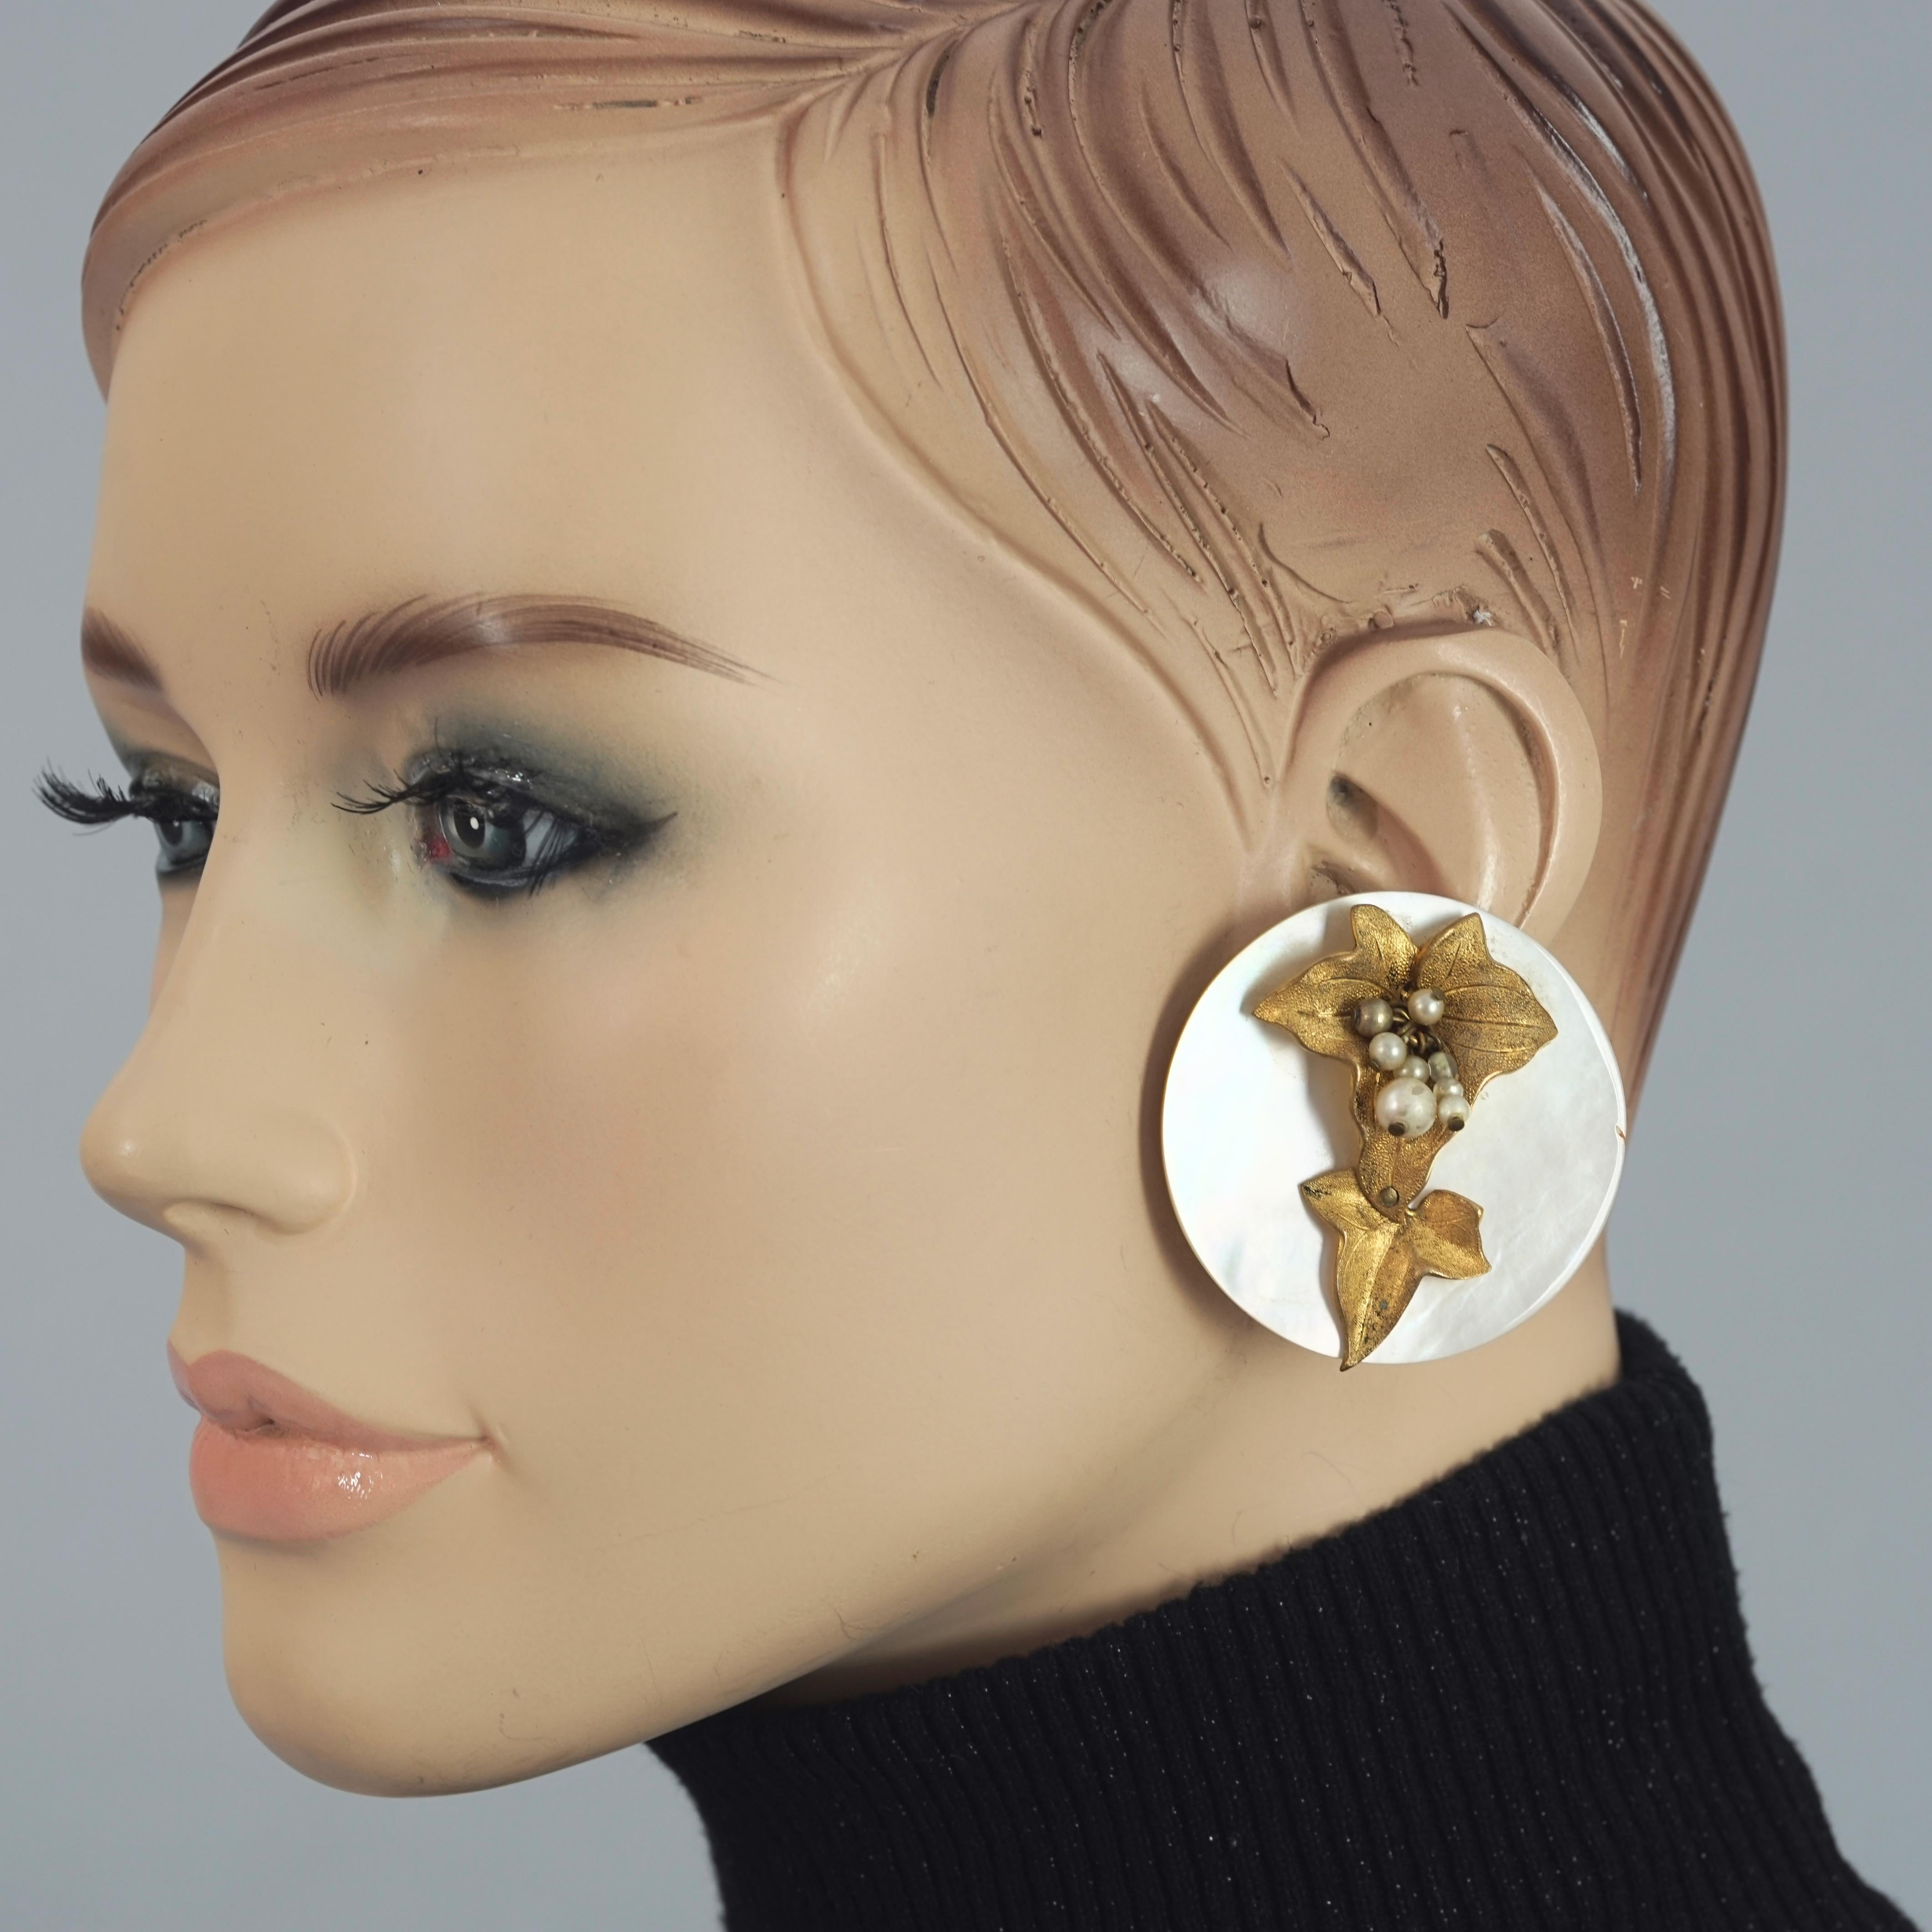 Vintage Mid Century French Mother of Pearl Jeweled Disc Earrings

Measurements:
Height: 1.85 inches (4.7 cms)
Width: 1.85 inches (4.7 cms)
Weight per Earring: 17 grams

Features:
- Massive mother of pearl disc earrings.
- Textured leaf metal overlay